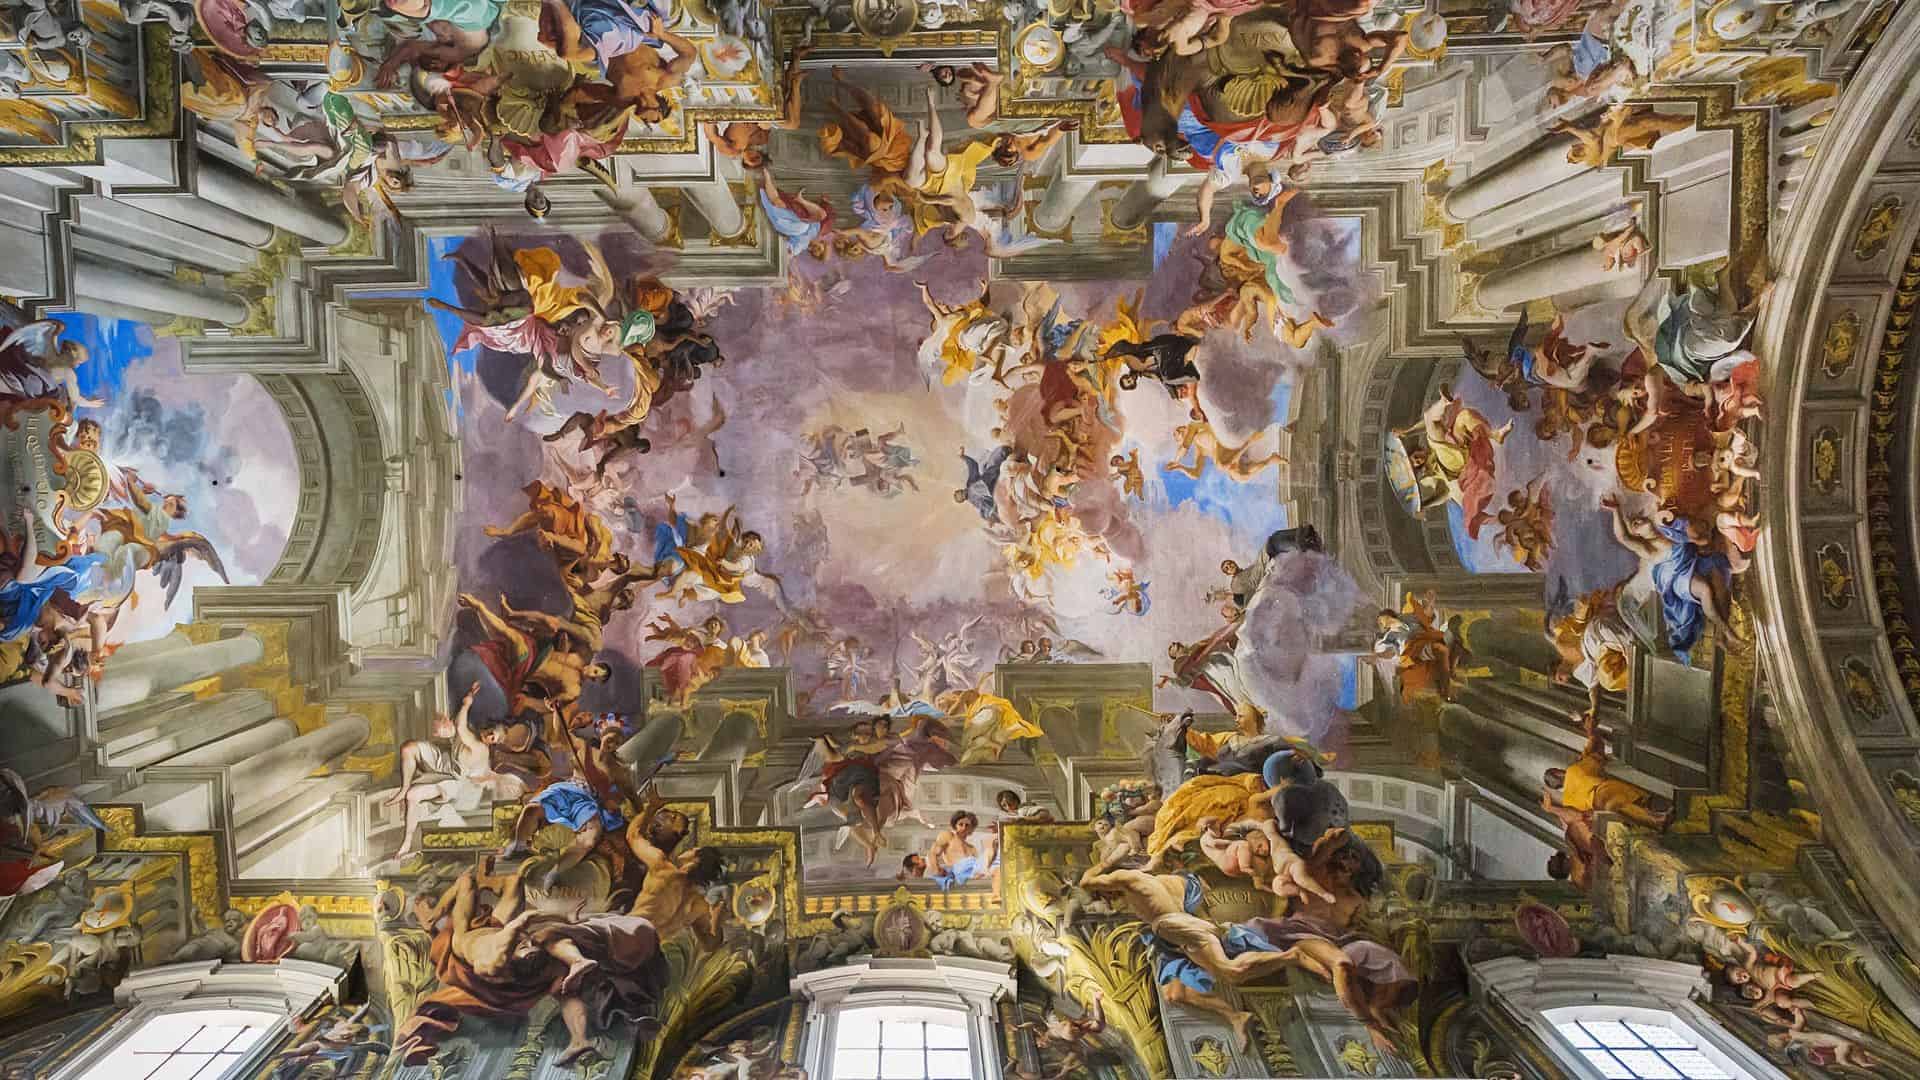 The painted trompe d'oeil ceiling at the church of St. Ignatius